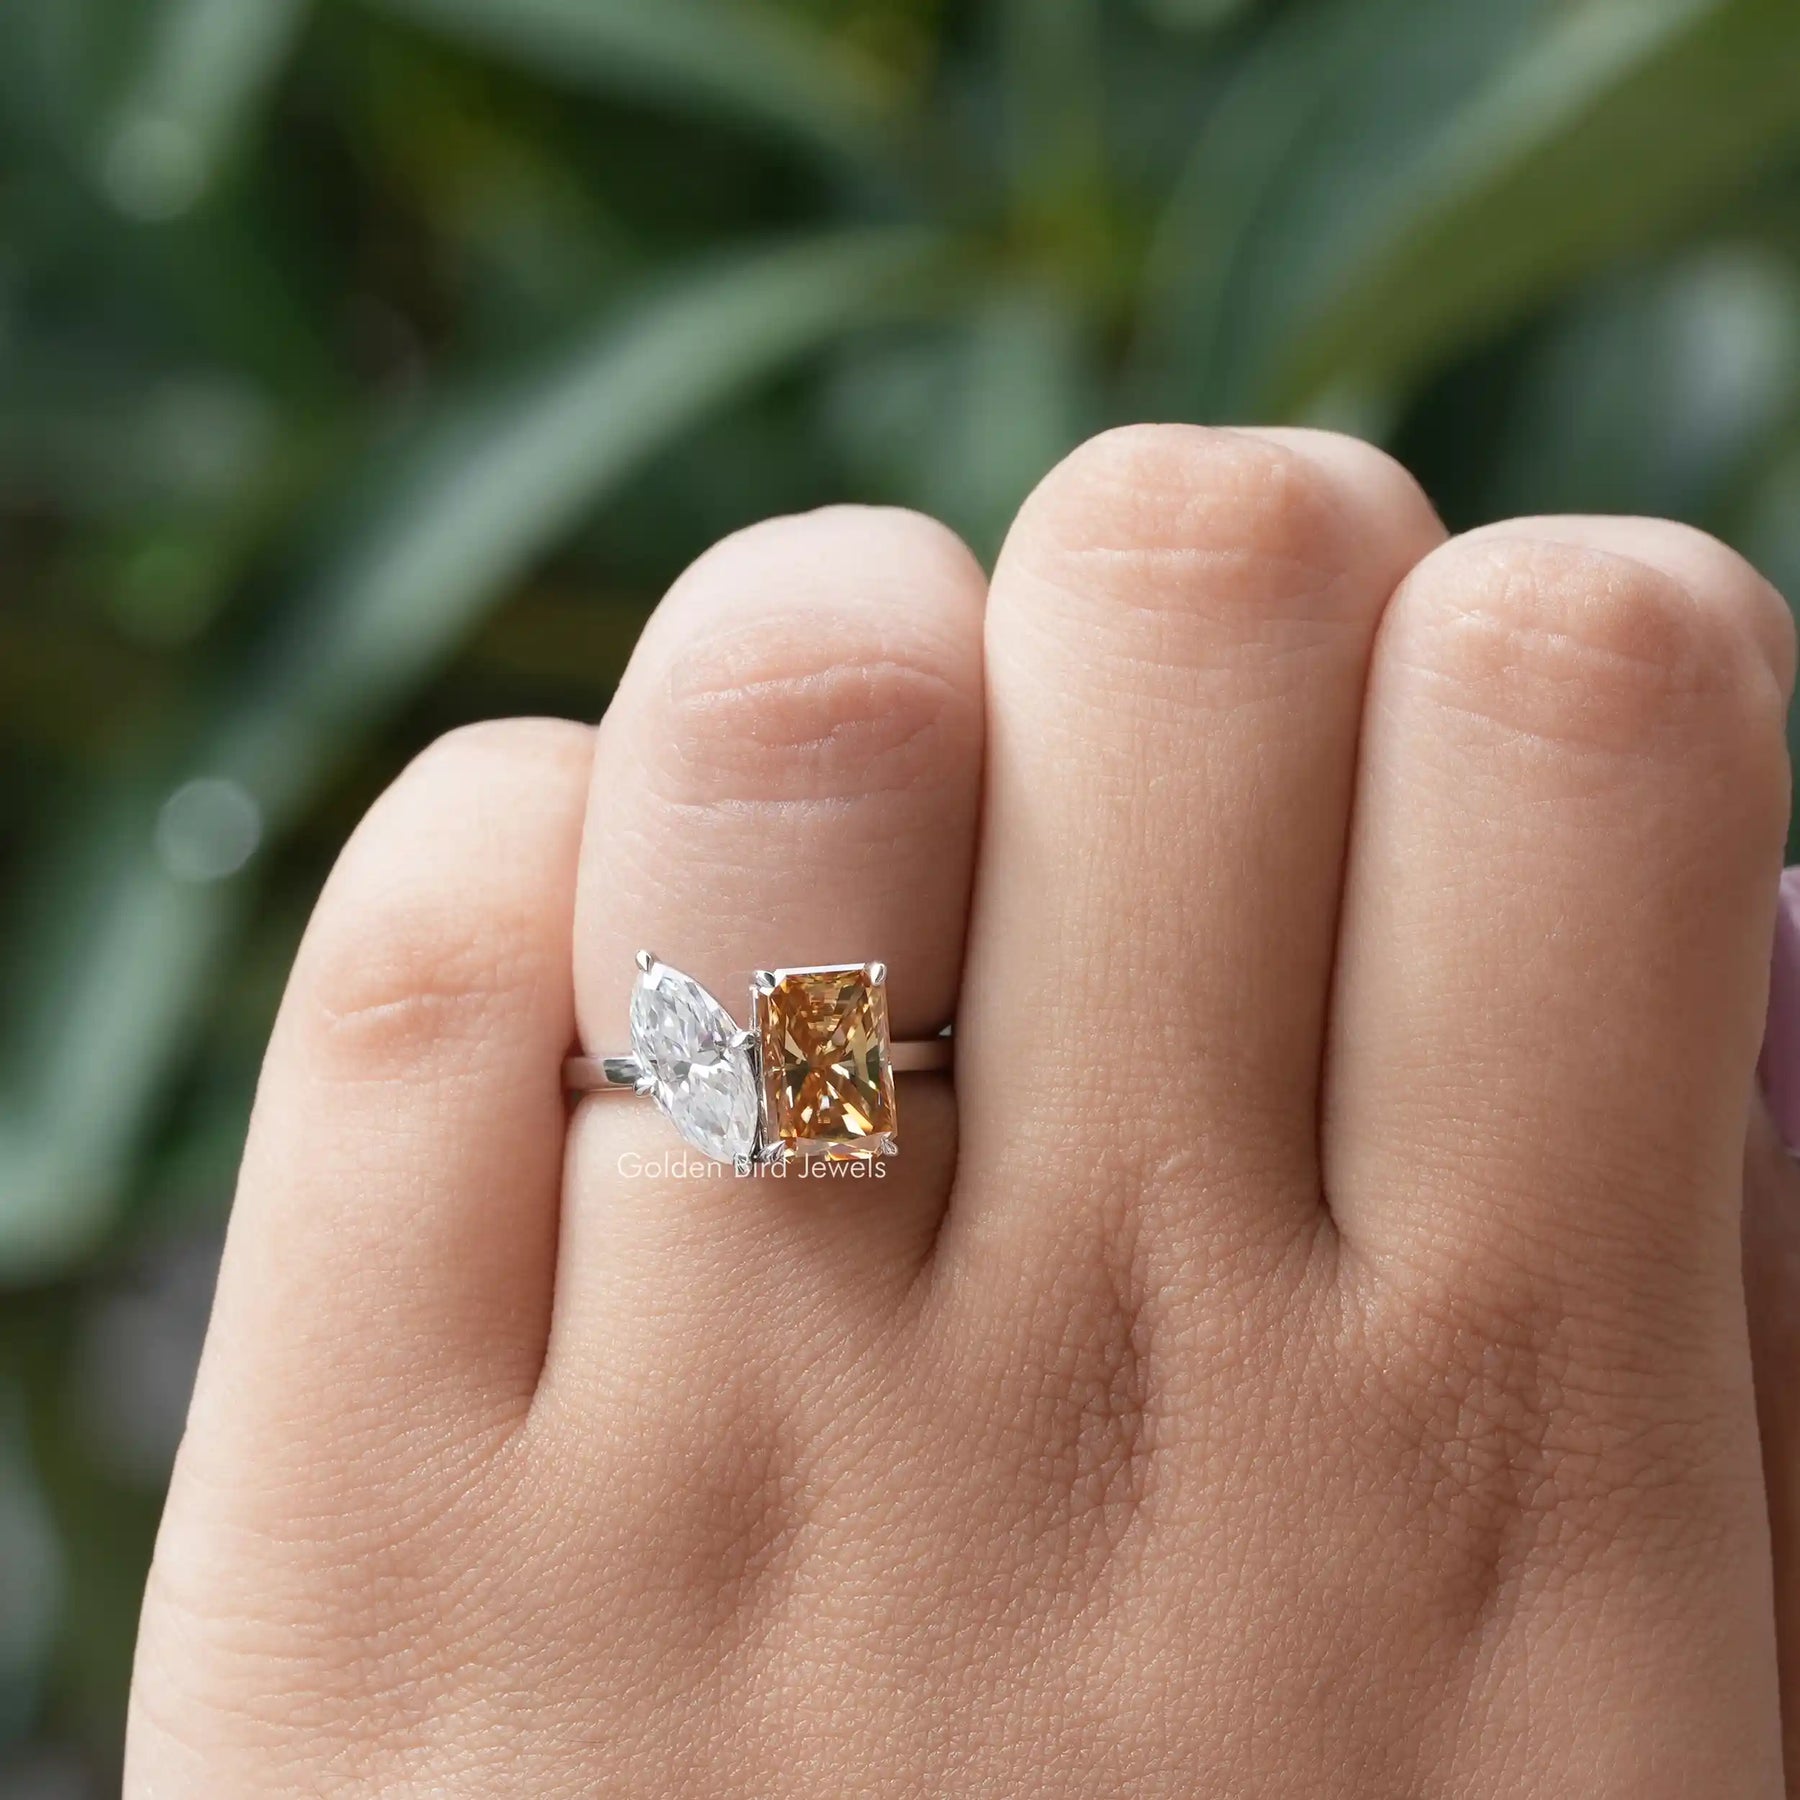 [Moissanite Marquise And Radiant Cut Engagement Ring]-[Golden Bird Jewels]